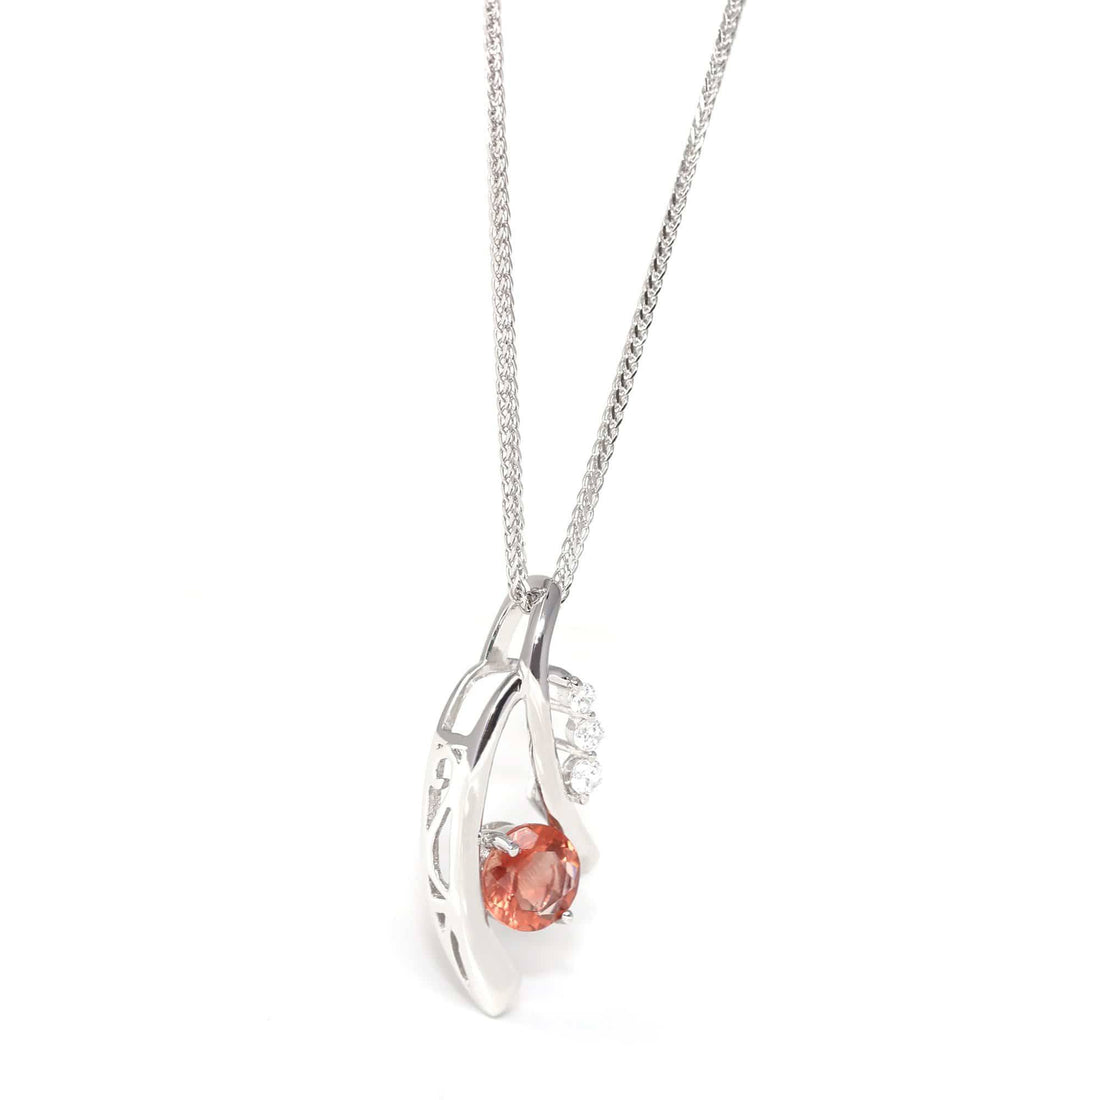 Baikalla Jewelry Sunstone Necklace Sterling Silver Natural Red Oregon Sunstone Necklace With White Sapphire